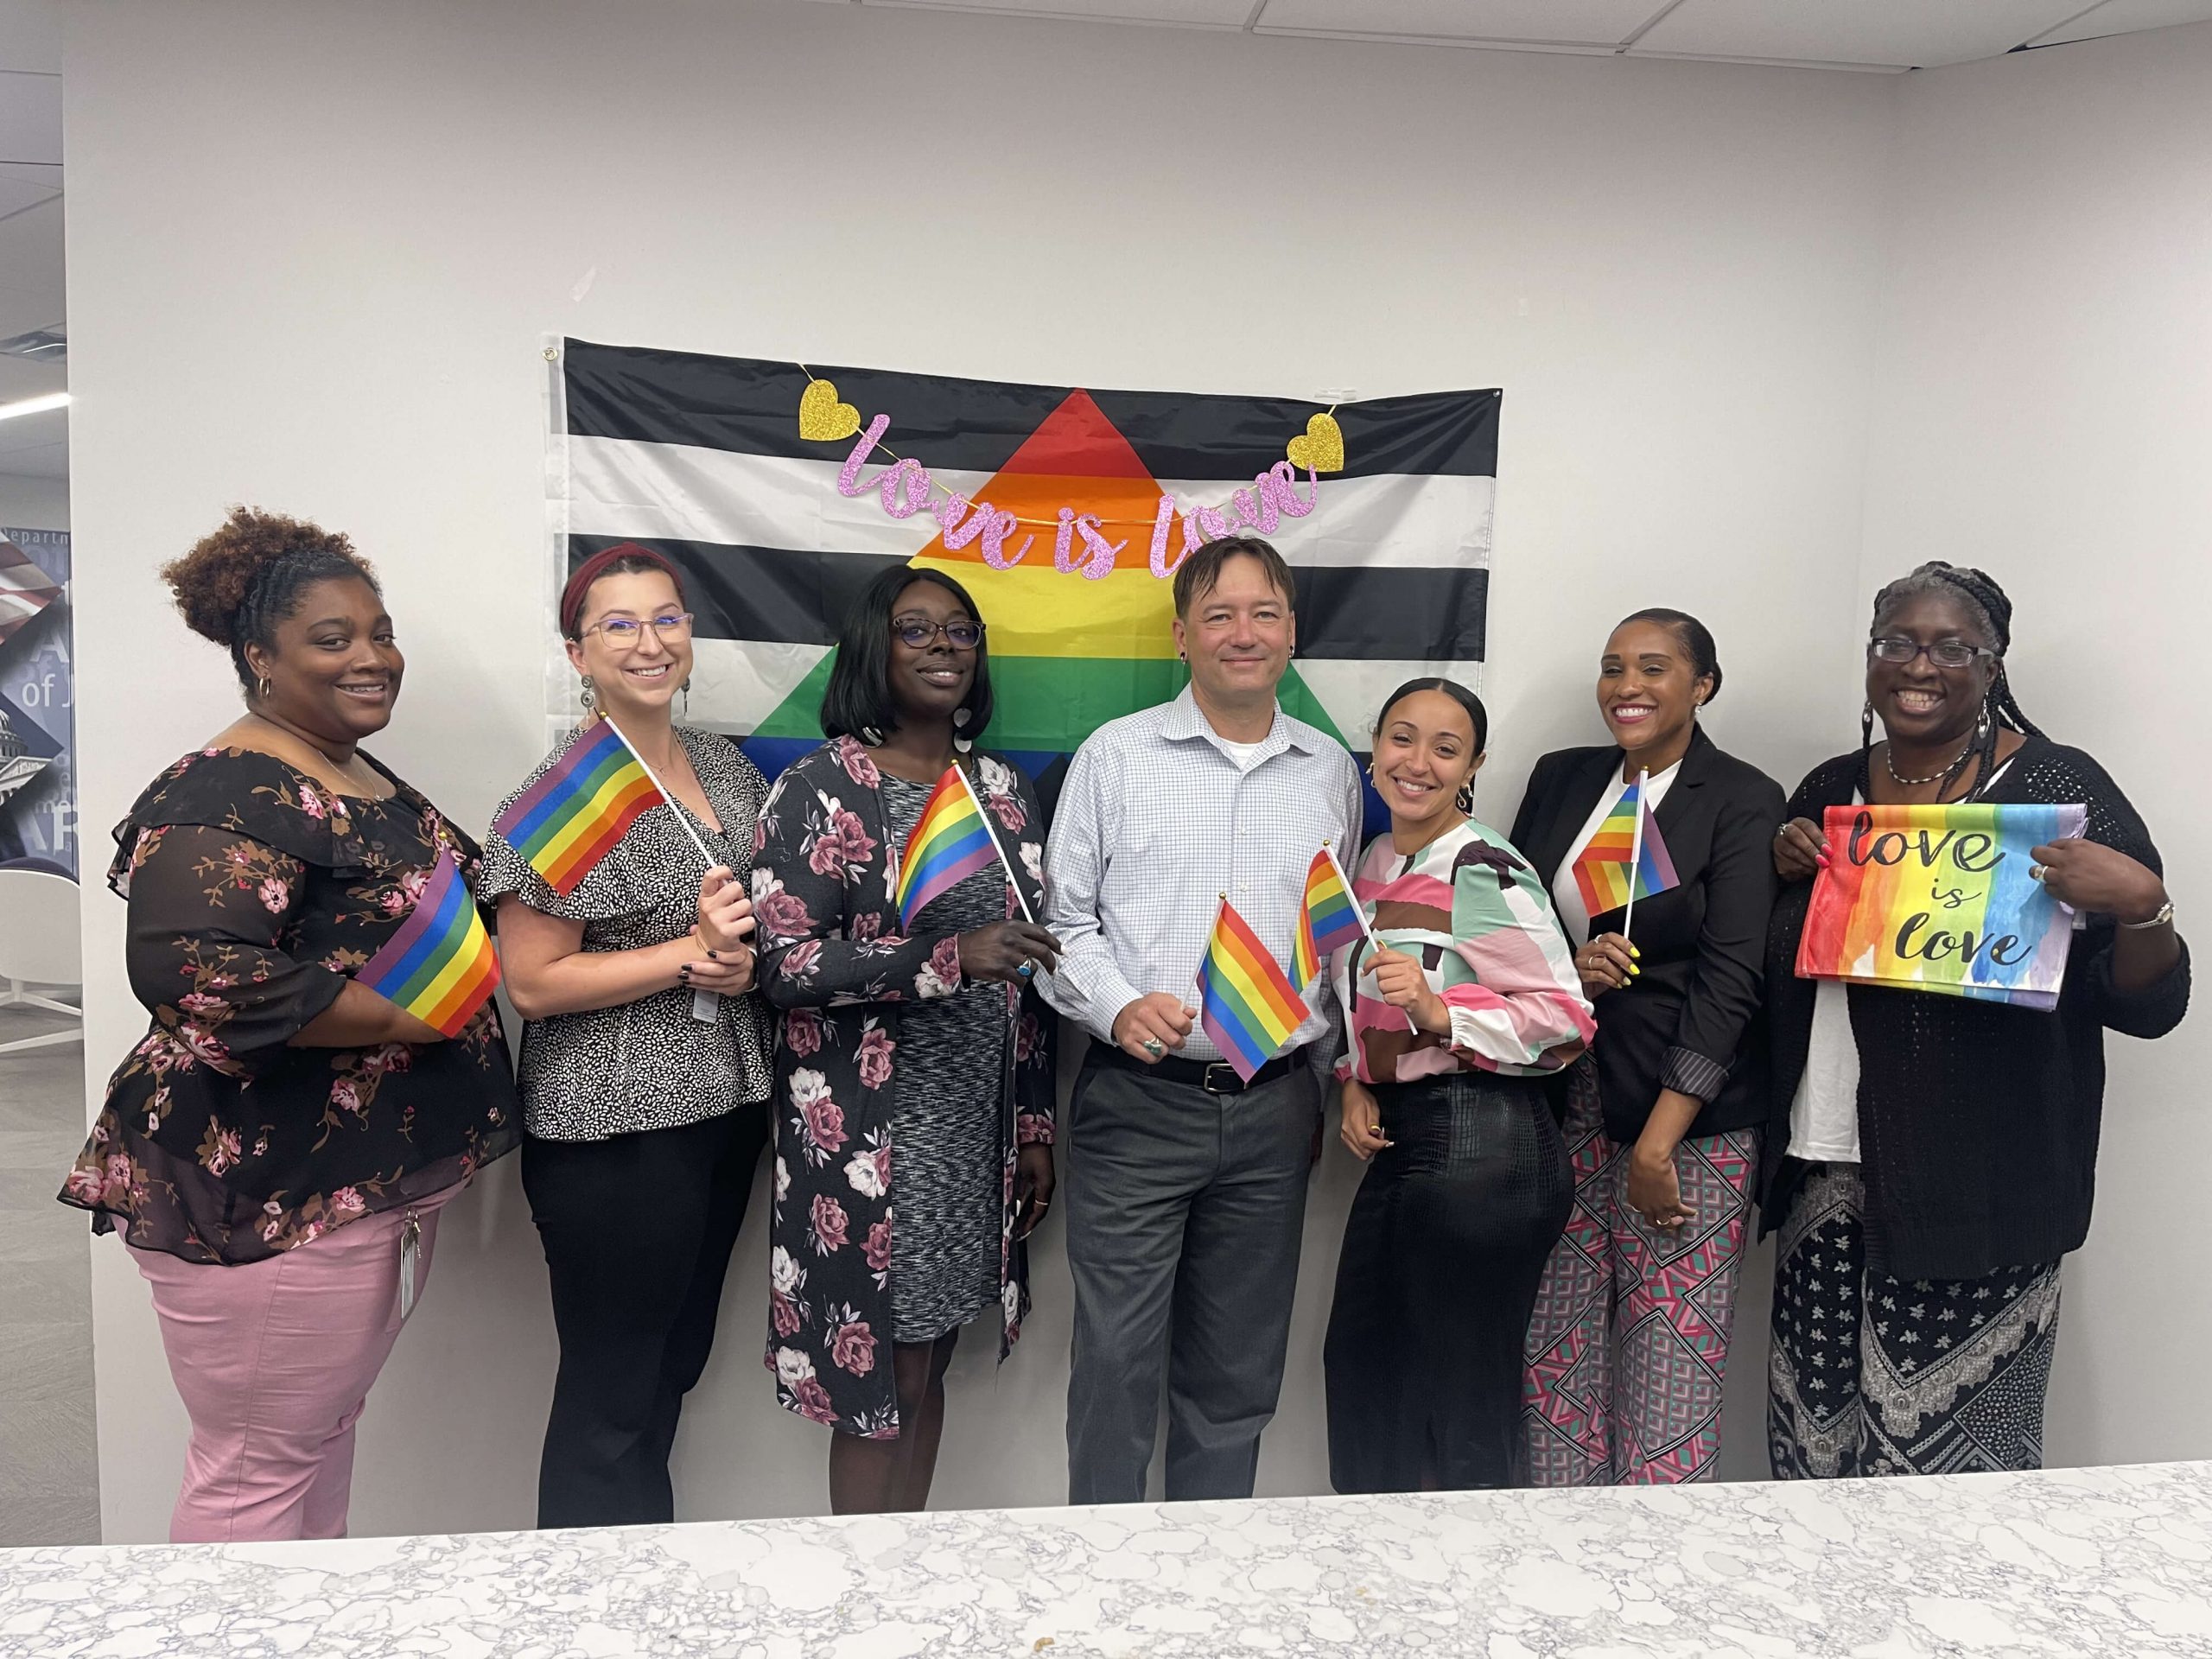 Group of people celebrating pride month by holding rainbow flags.